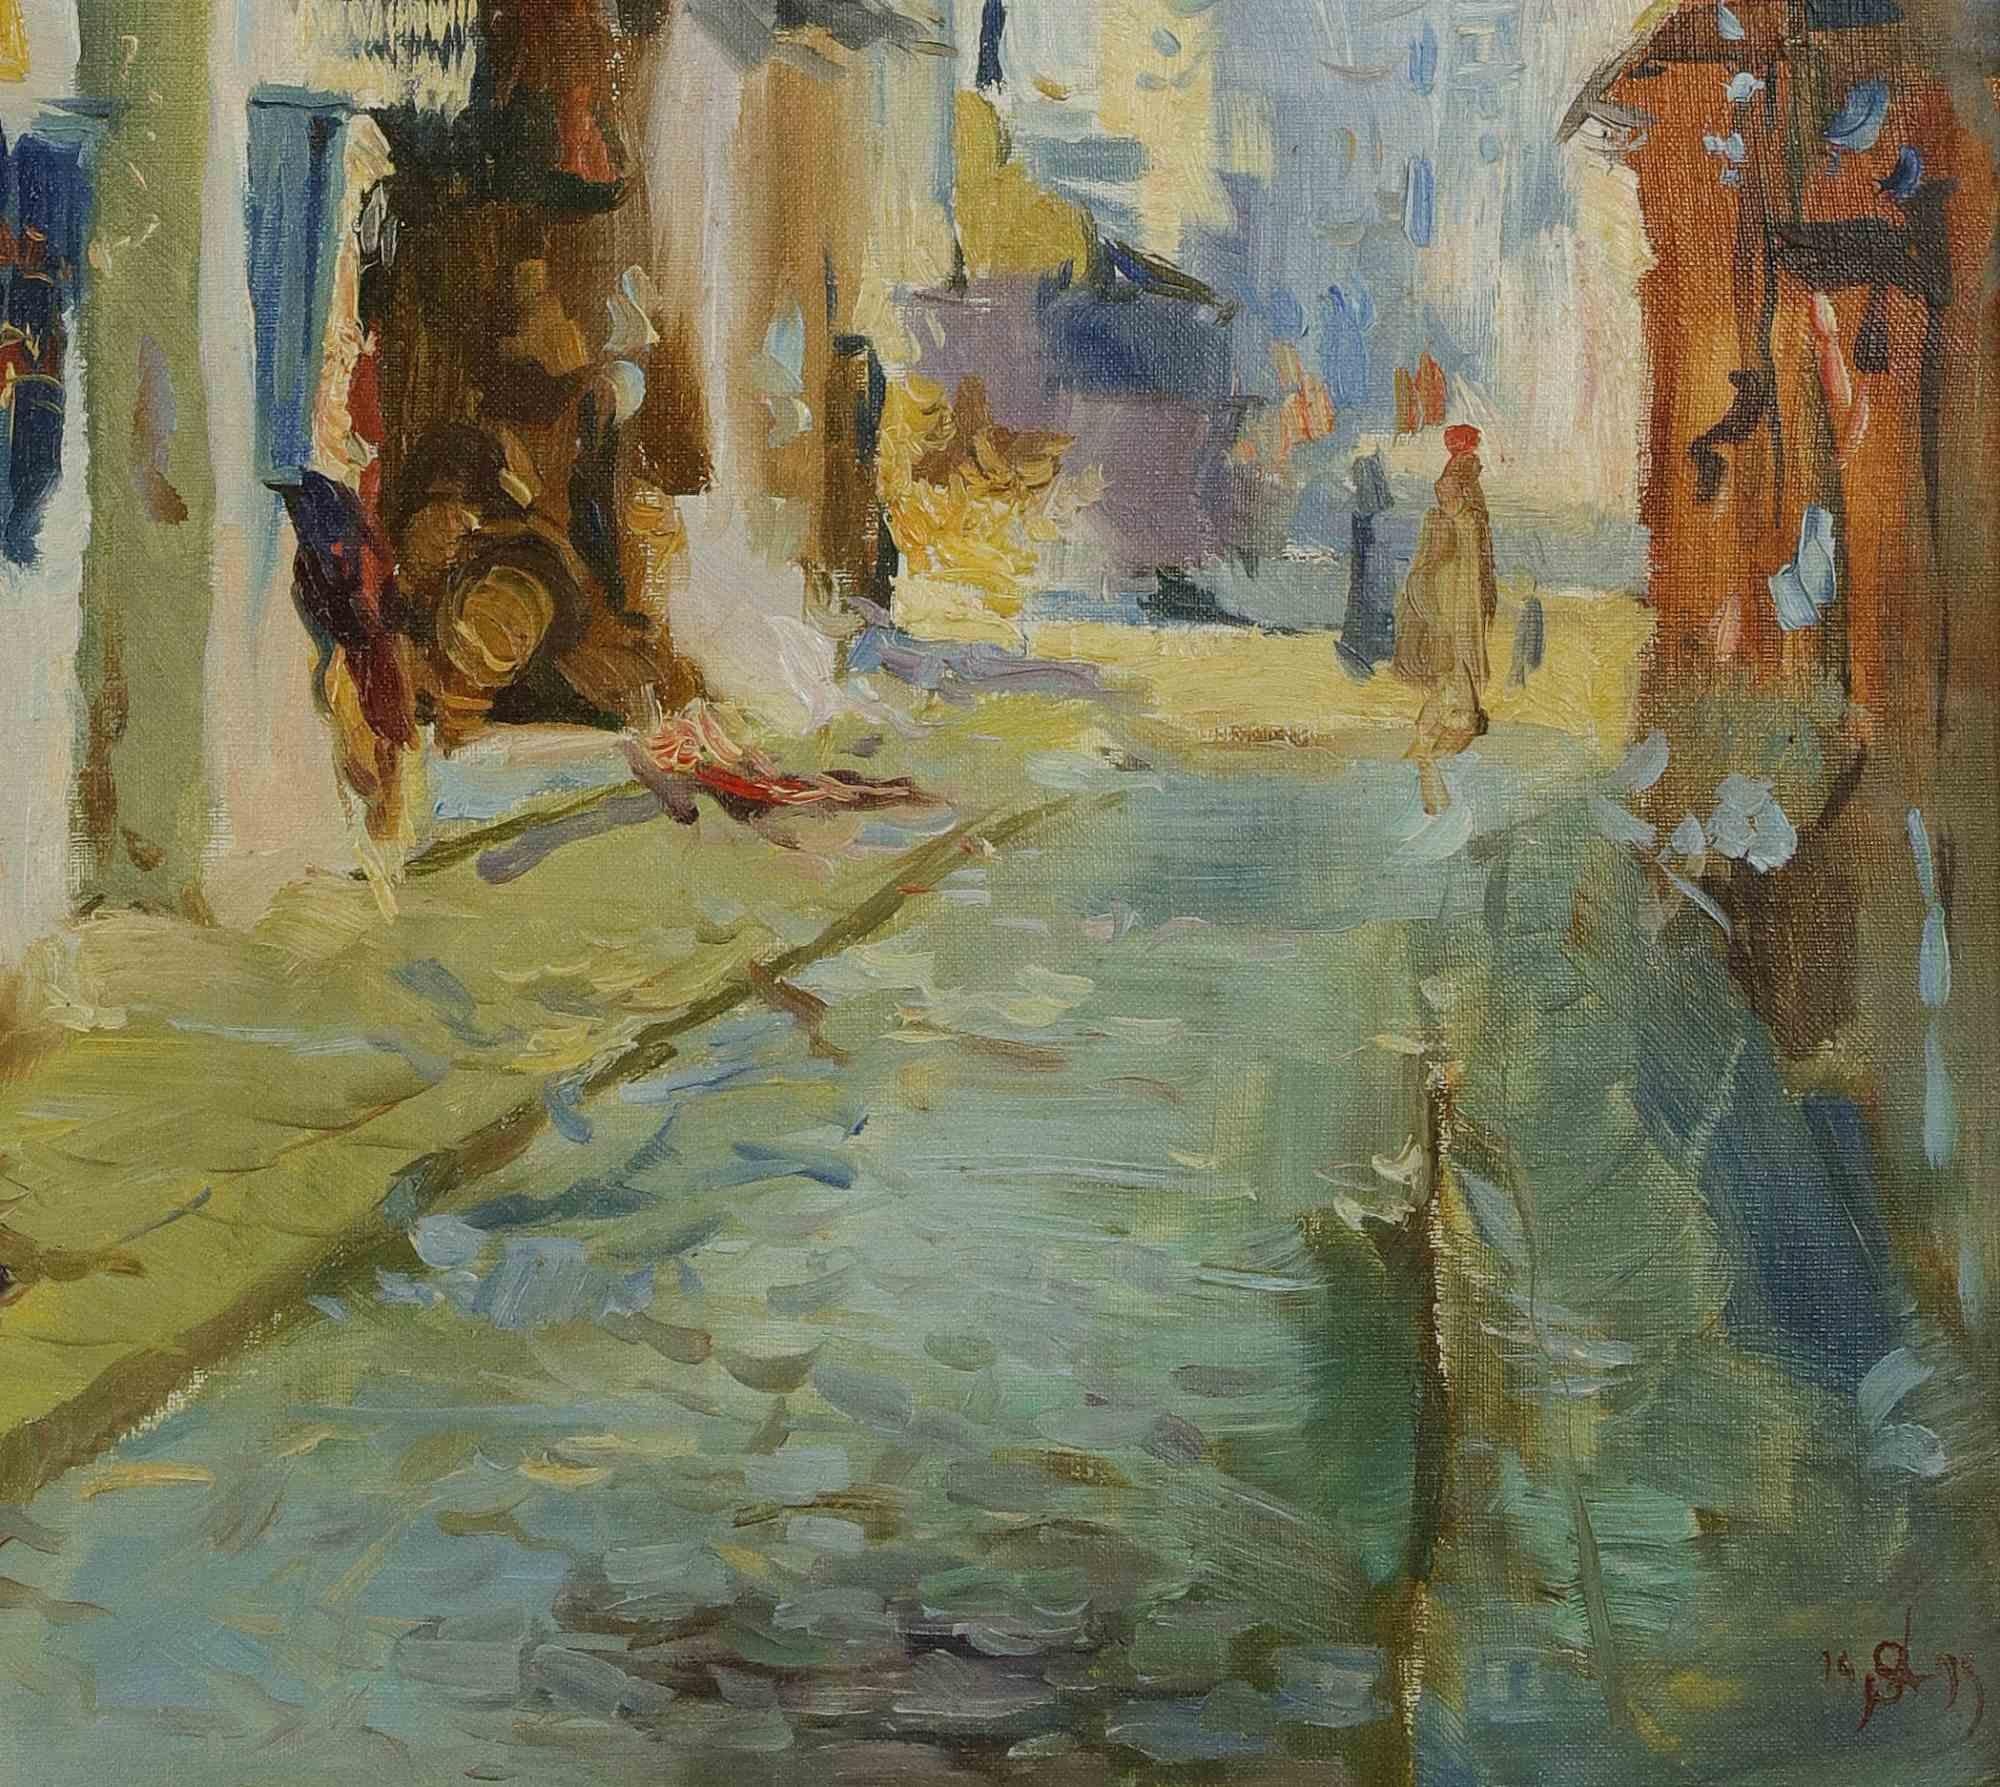 Streets of Tunis - Oil on Canvas by A. Sergheev - 1994 - Contemporary Painting by Alexander Sergheev